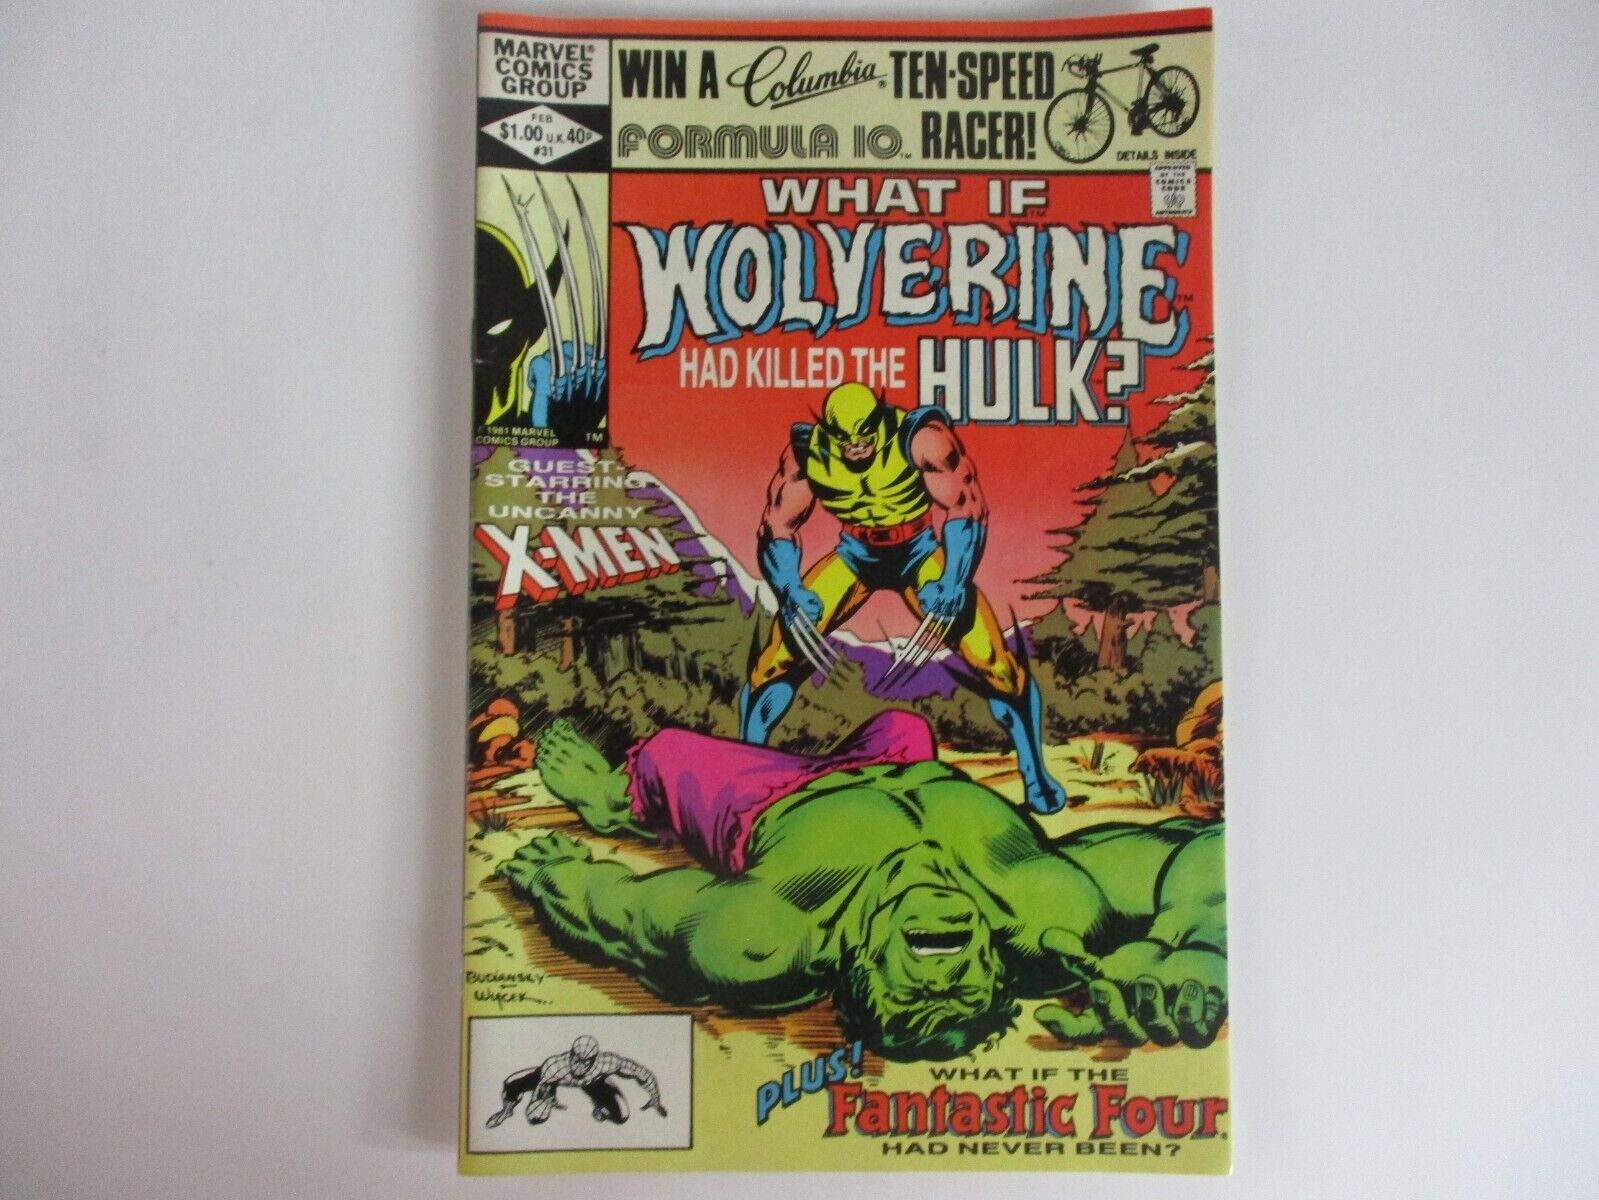 Marvel Comics WHAT IF #31 Featuring Wolverine & Hulk February 1982 VERY NICE